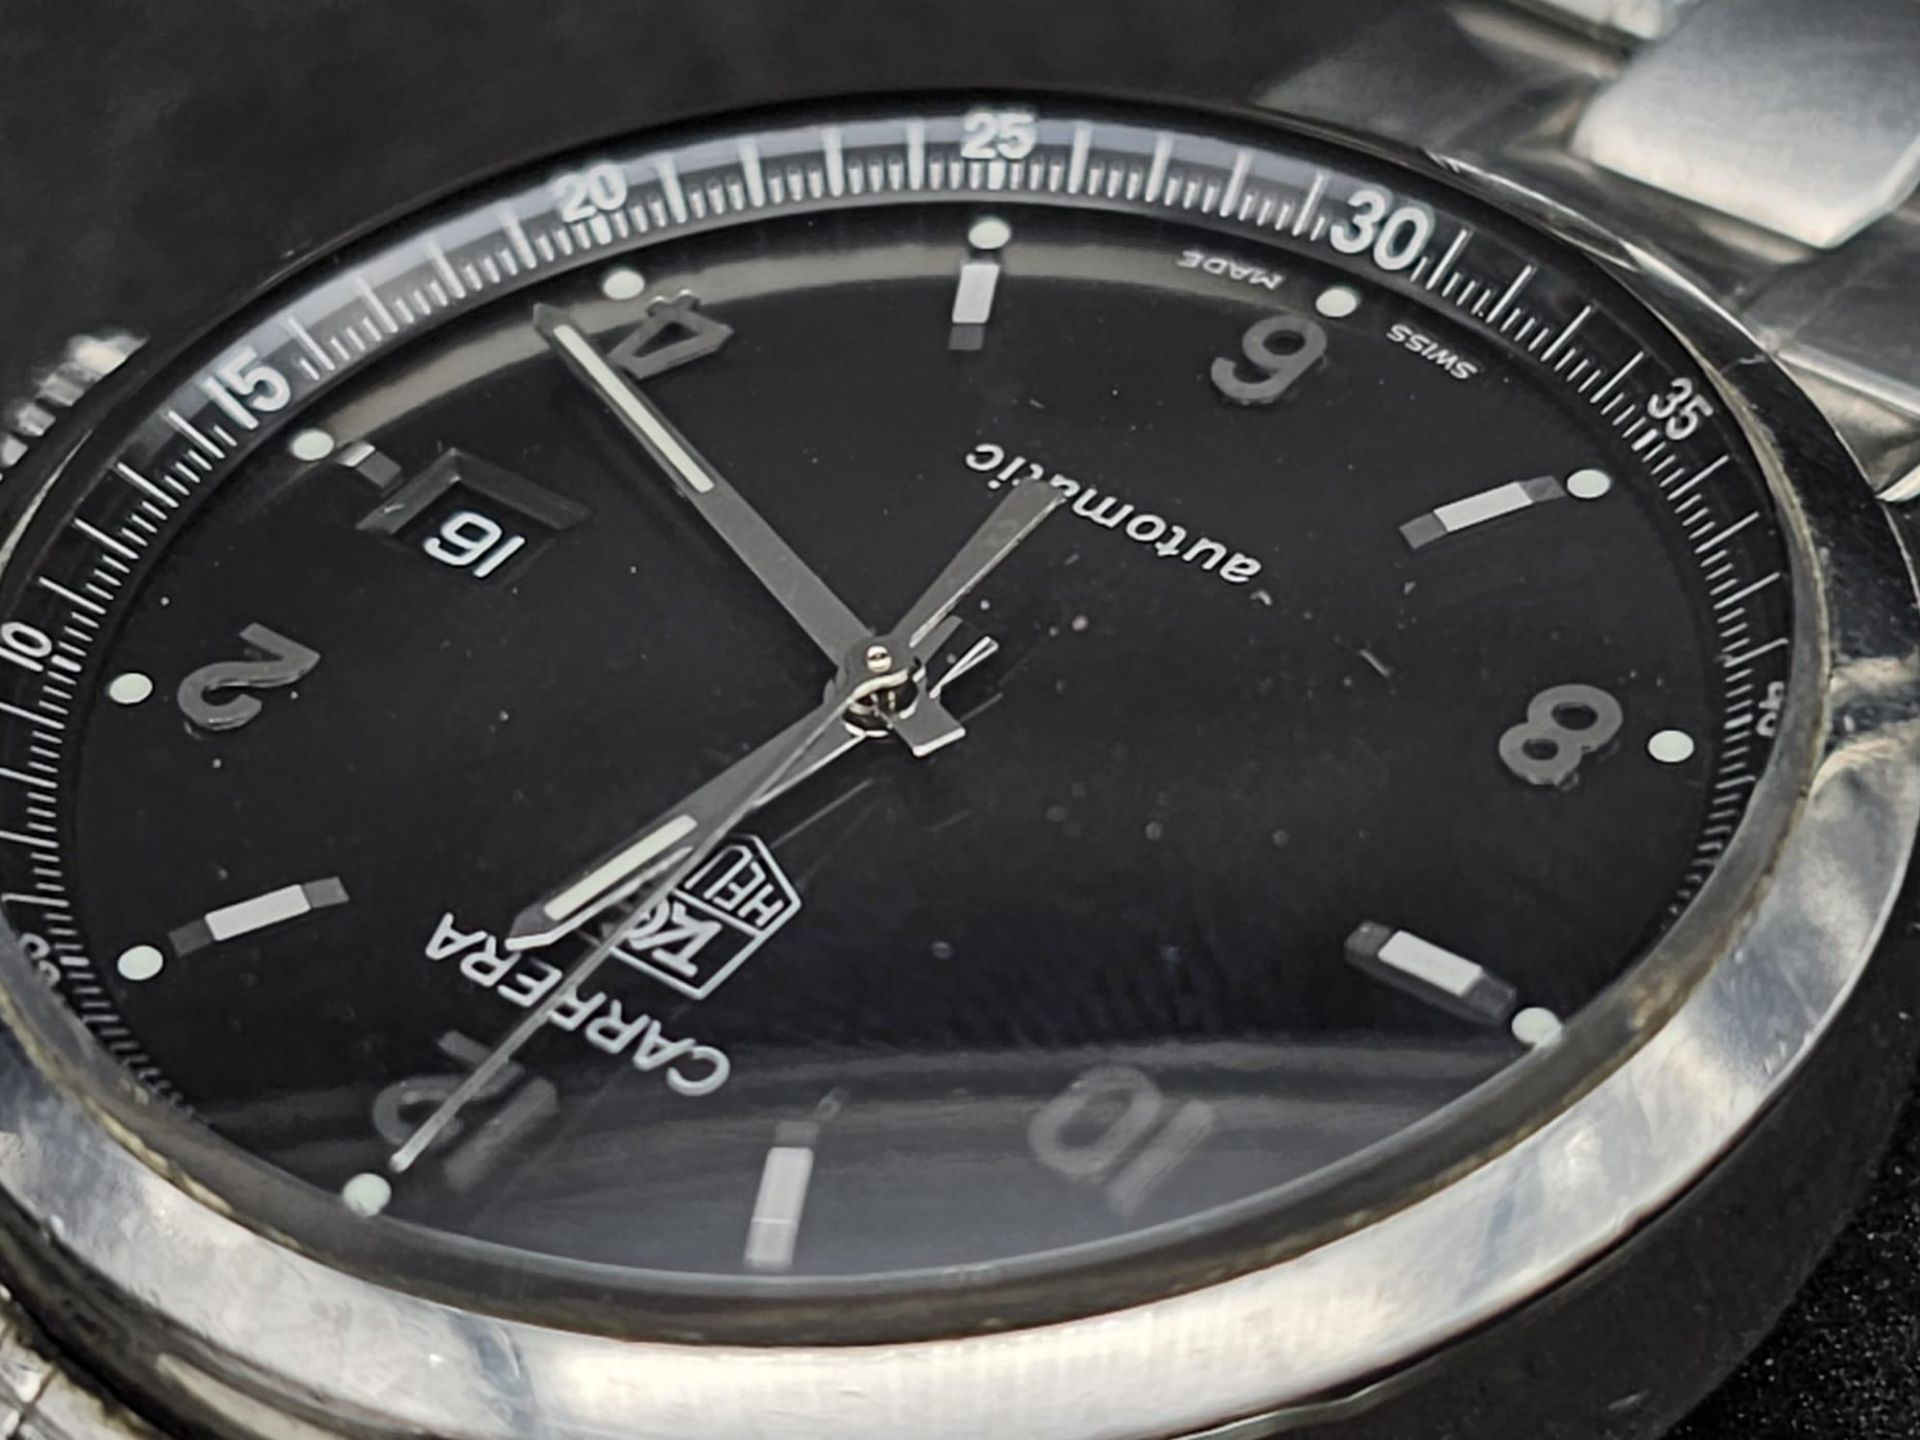 A FABULOUS TAG-HEUER CARRERA AUTOMATIC WATCH IN STAINLESS STEEL WITH COMPLIMENTARY BLACK DIAL . 40mm - Image 5 of 12